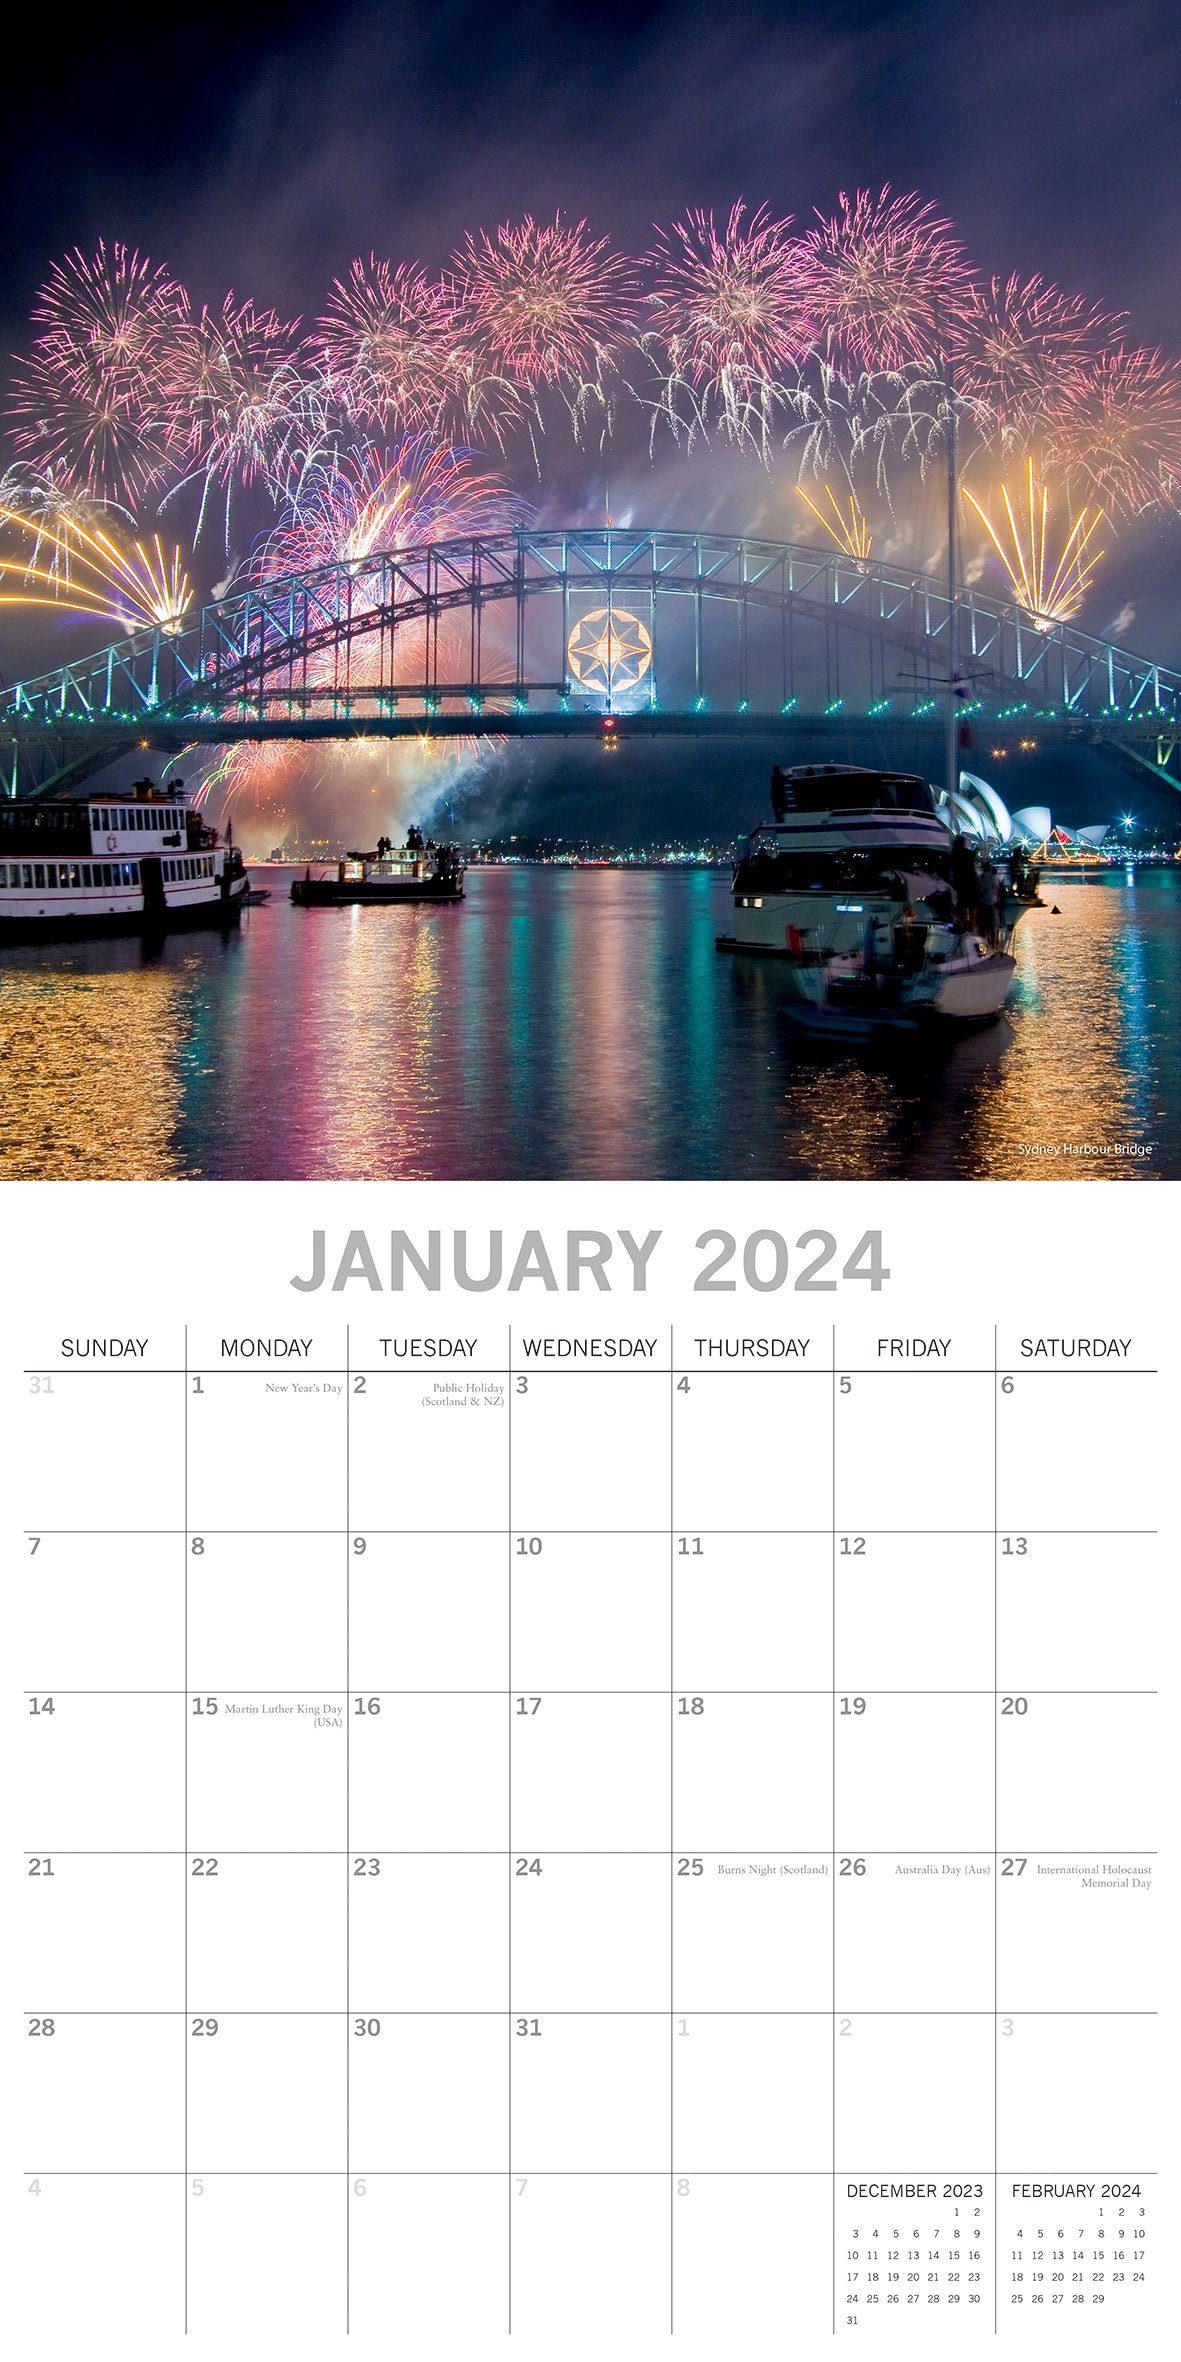 Sydney 2024 Square Wall Calendar 16Month Premium Planner Christmas New Year Gift